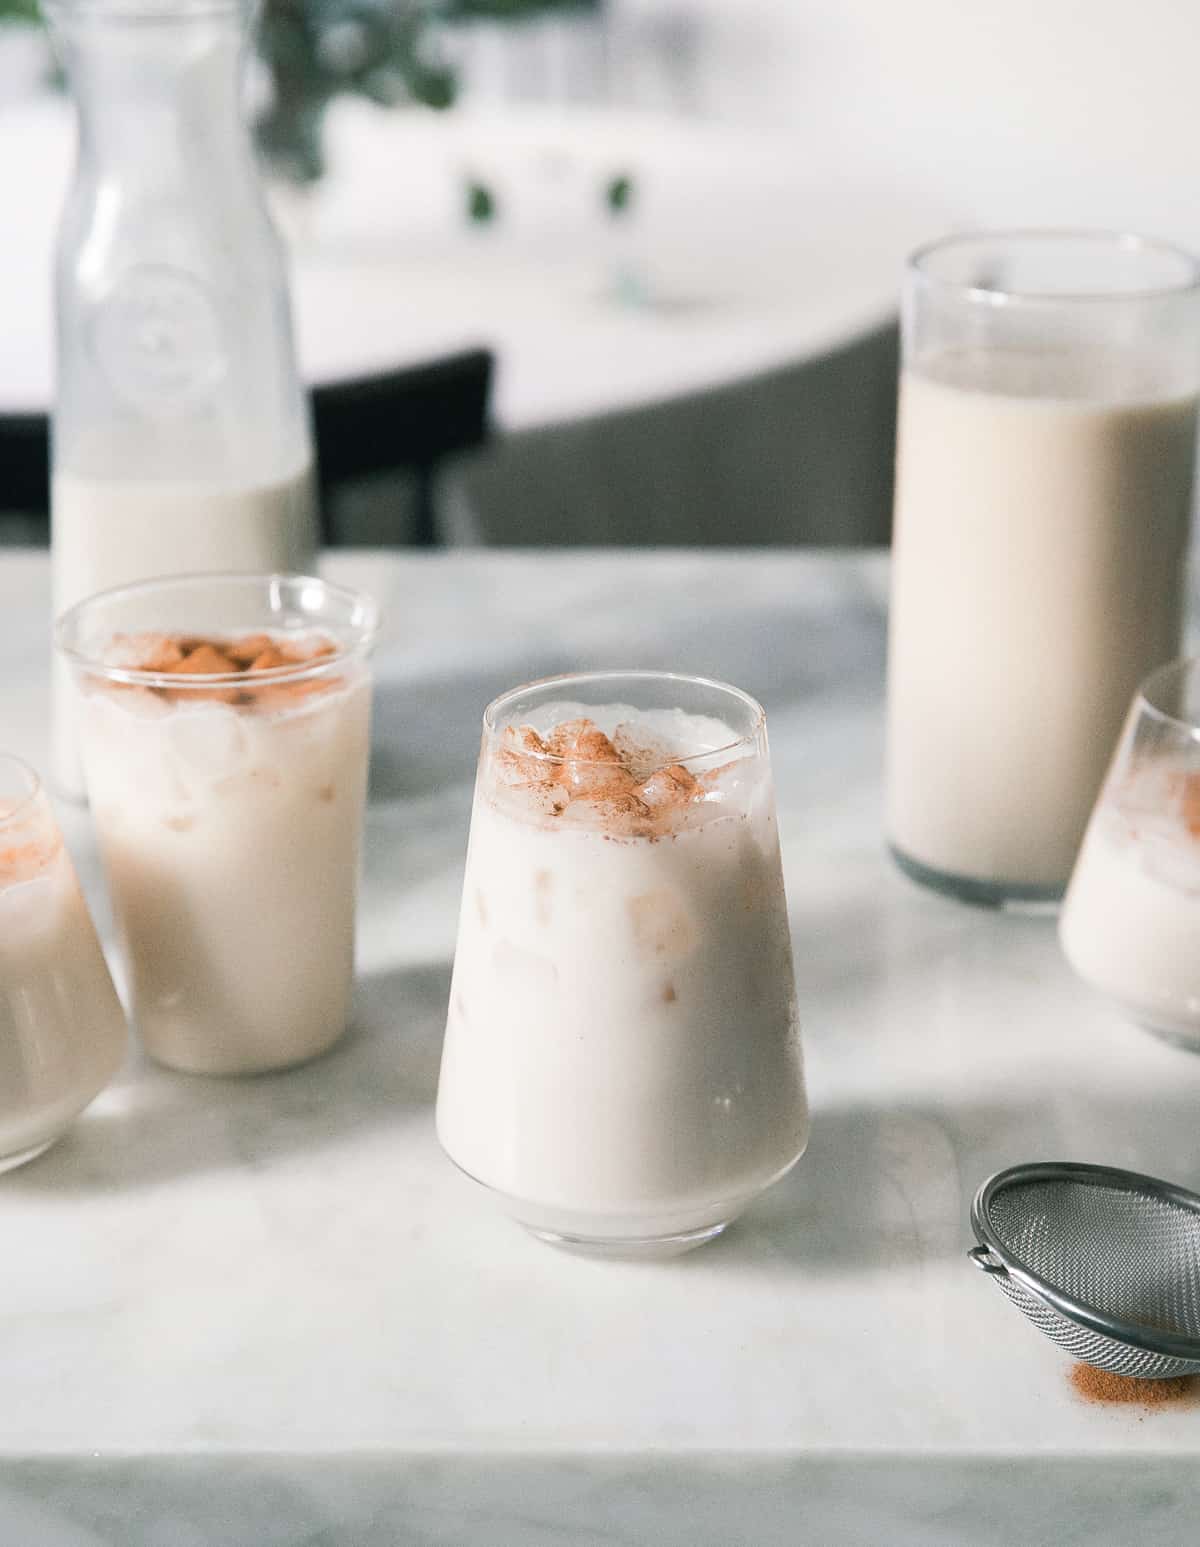 Horchata Recipe (Authentic Mexican Rice Drink) - A Cozy Kitchen